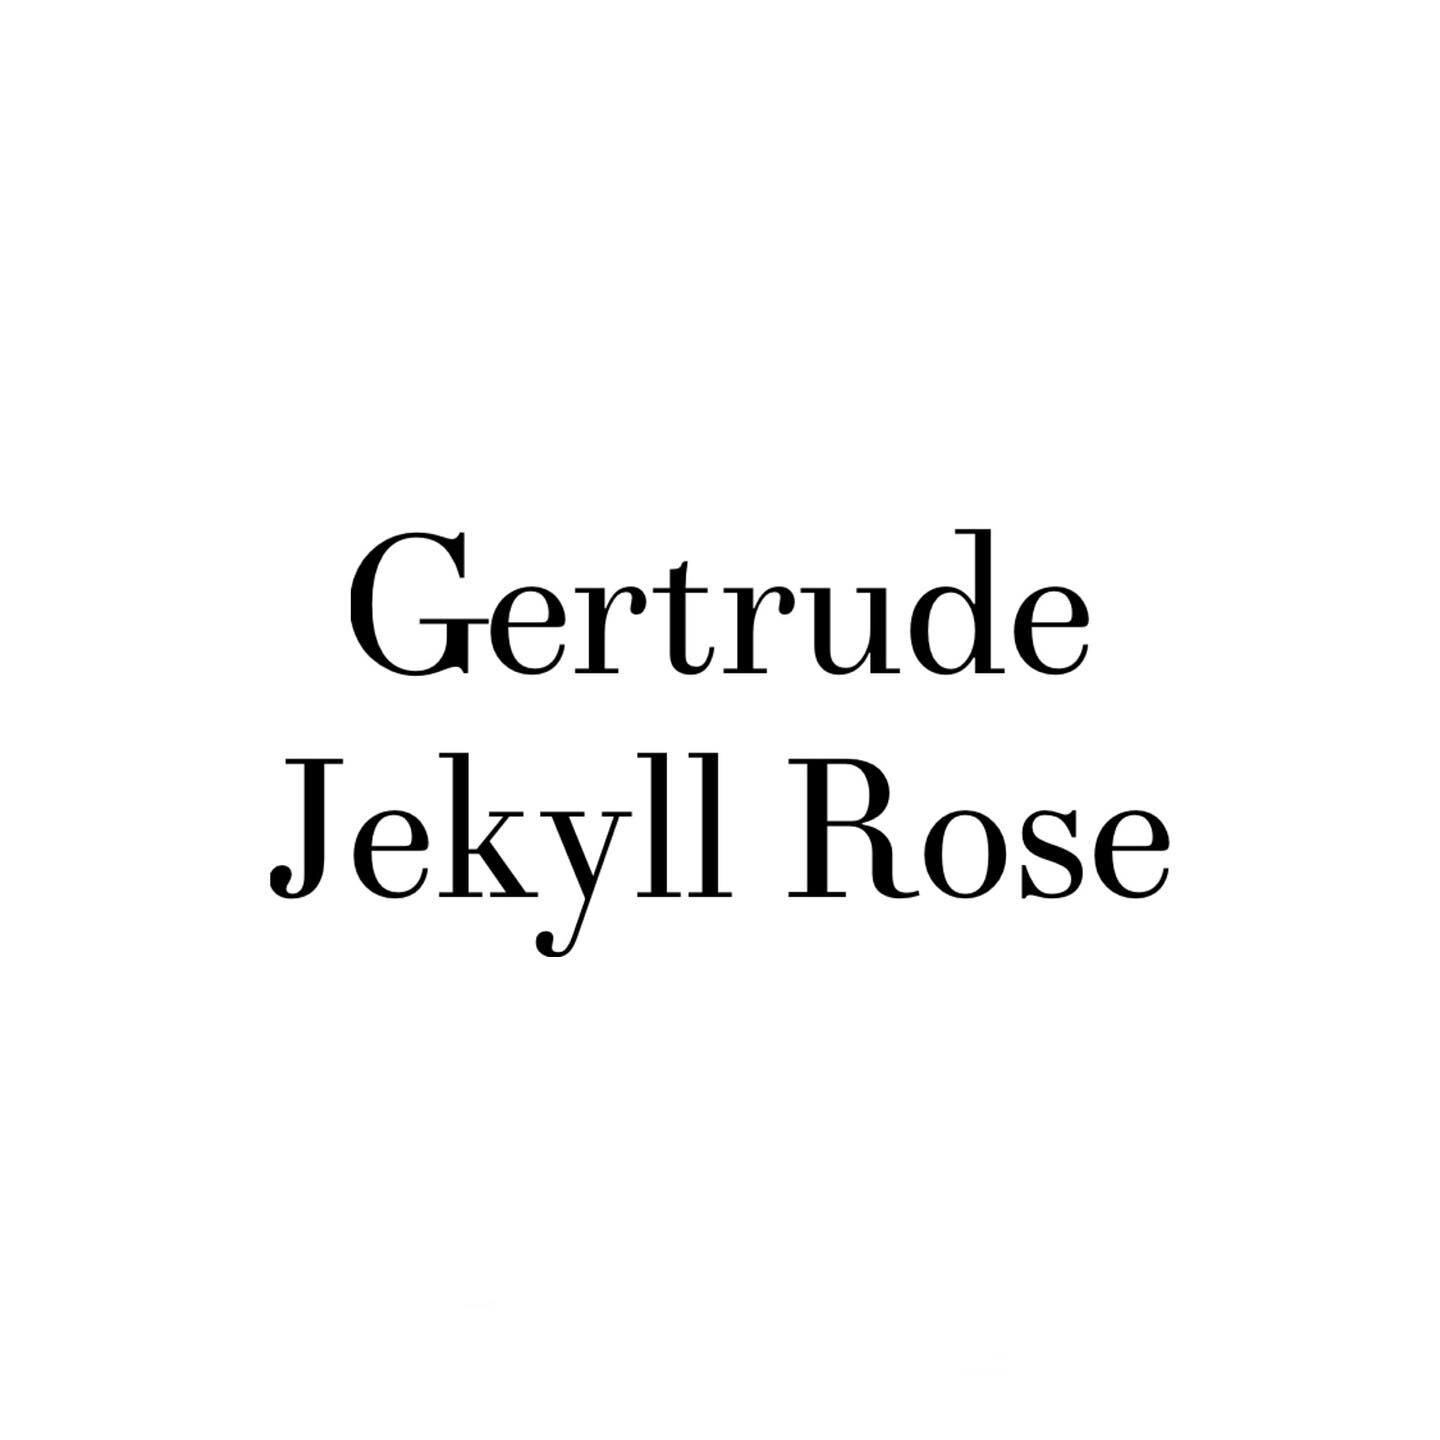 Rose name: Gertrude Jekyll
Rose type: English Shrub Rose Bred By David Austin
Color/Fragrance: Bright Pink/Strong, Old Rose
Flowering: Repeat Flowering
Size: Large Shrub (5ft x 3 1/2ft)
Bloom Size: Large
USDA Hardiness Zone: 9B
When Planted: January 